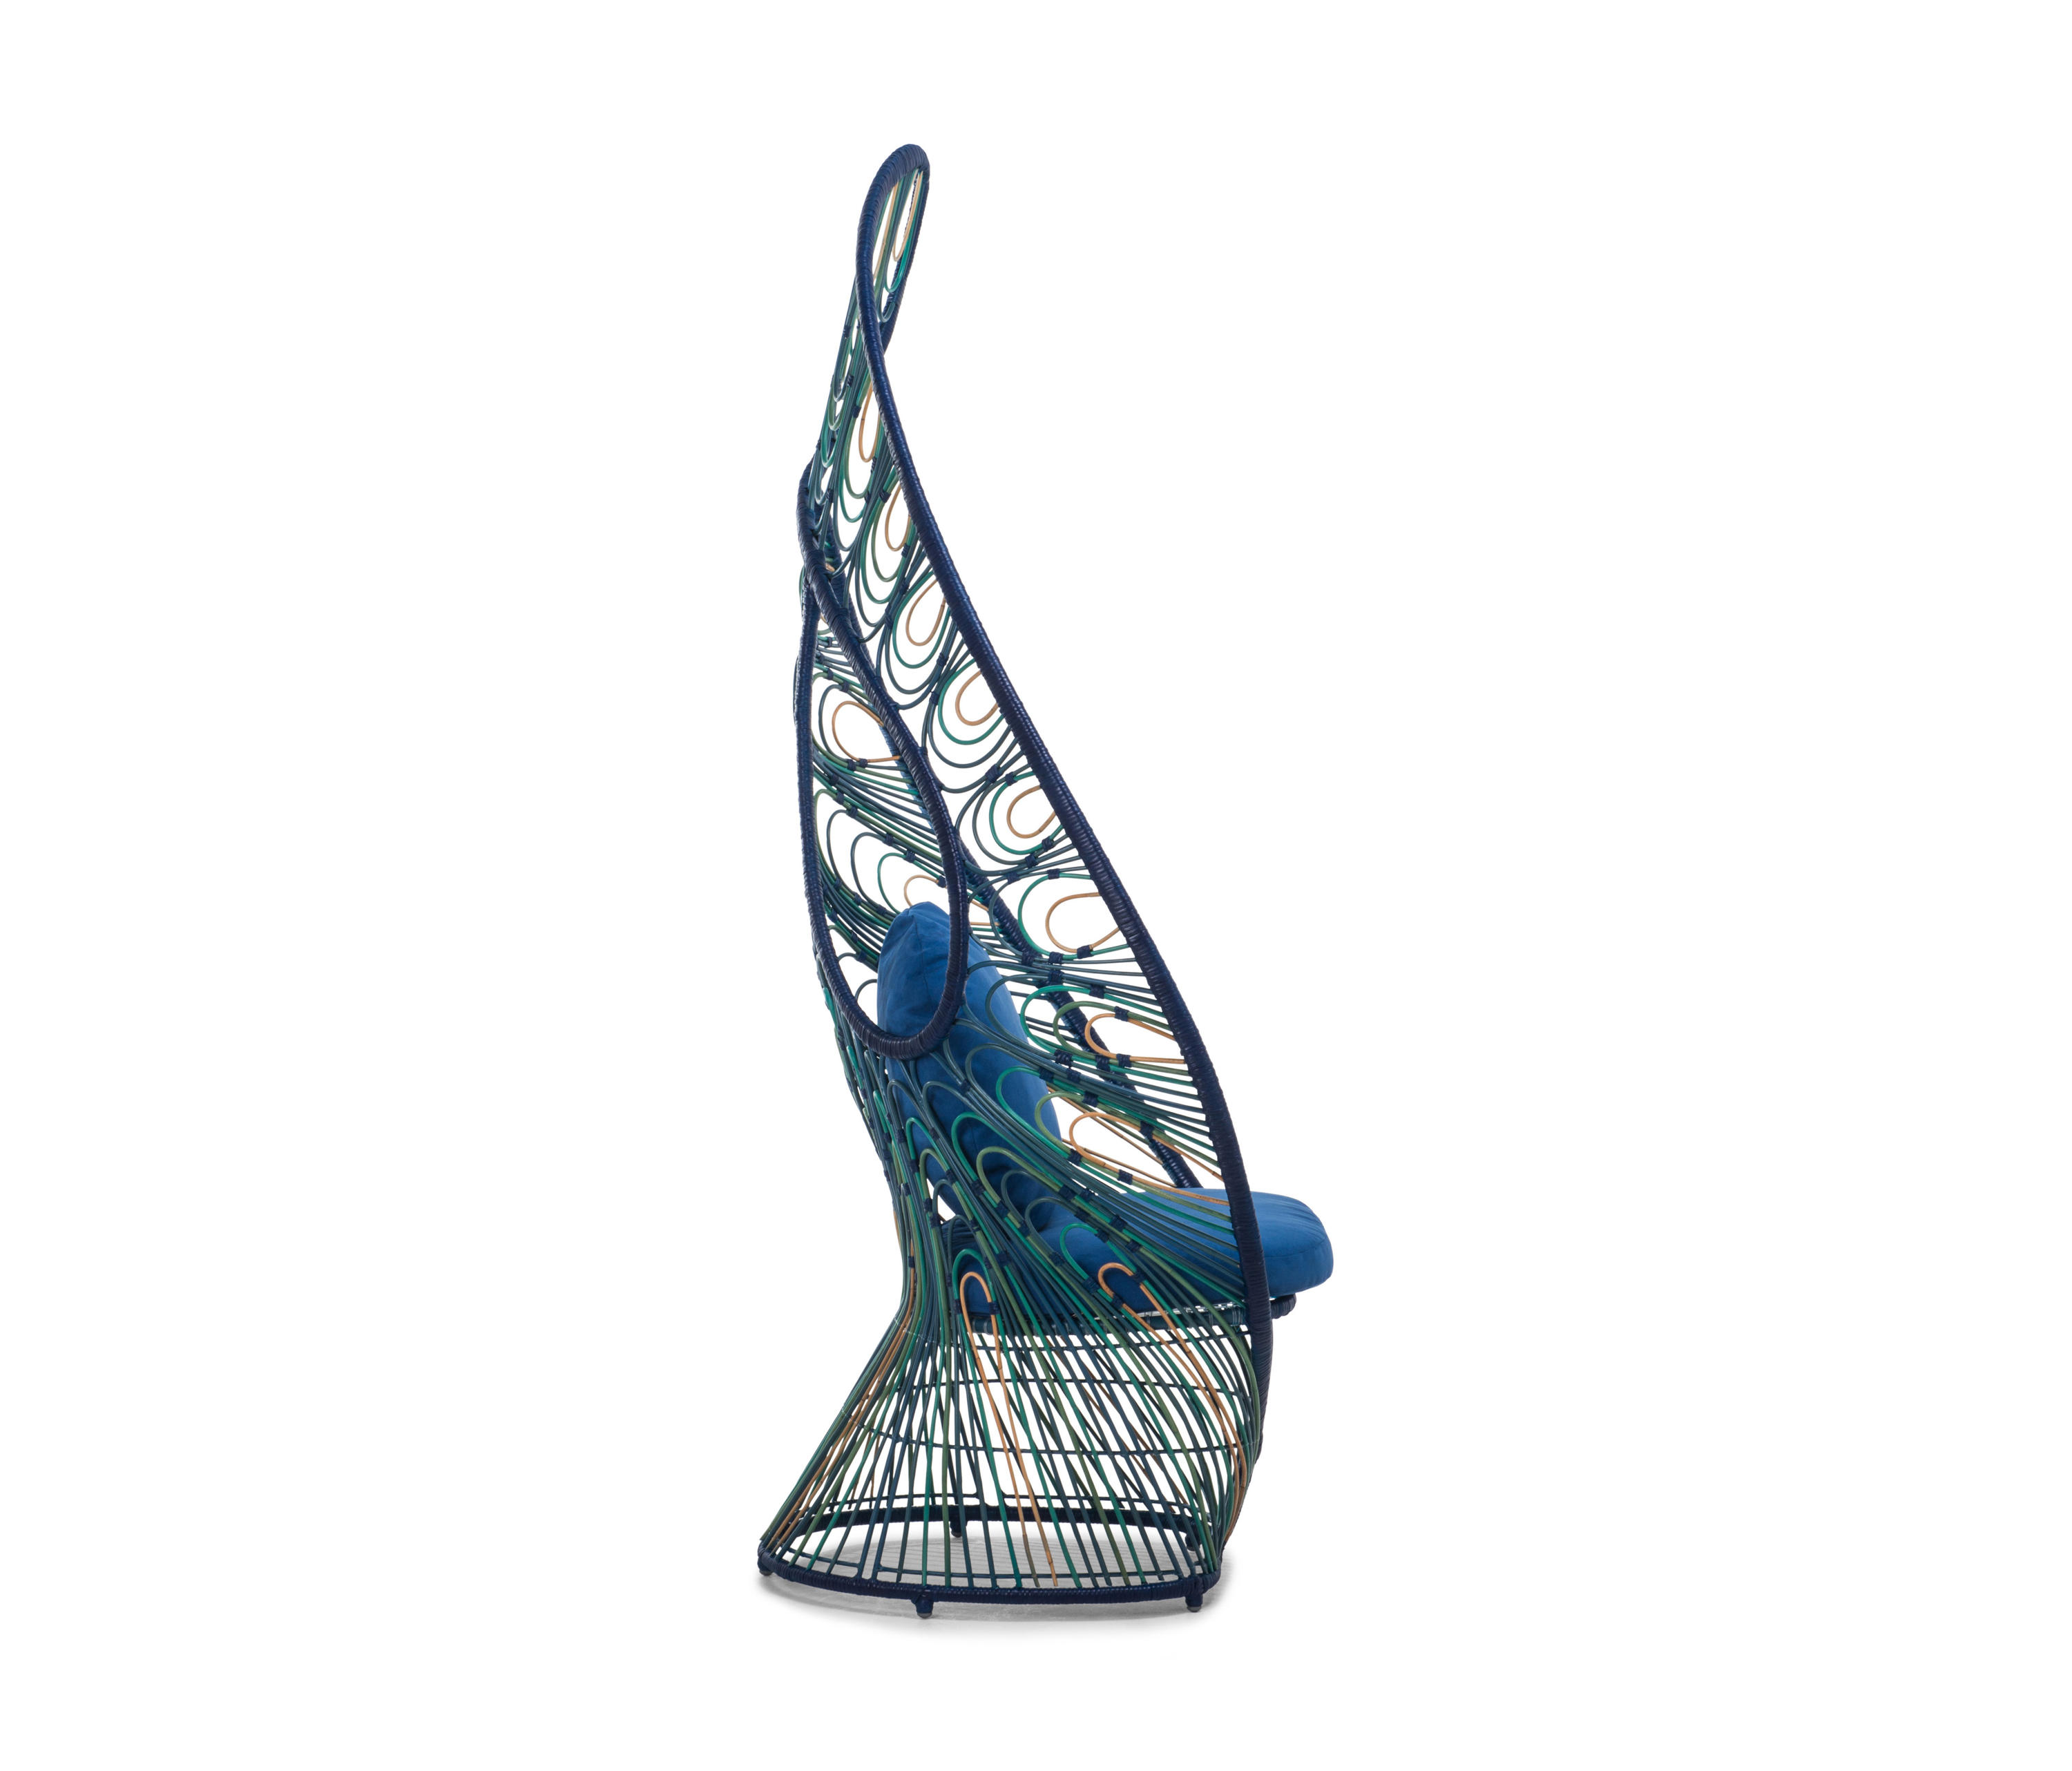 Peacock Easy Armchair by Kenneth Cobonpue